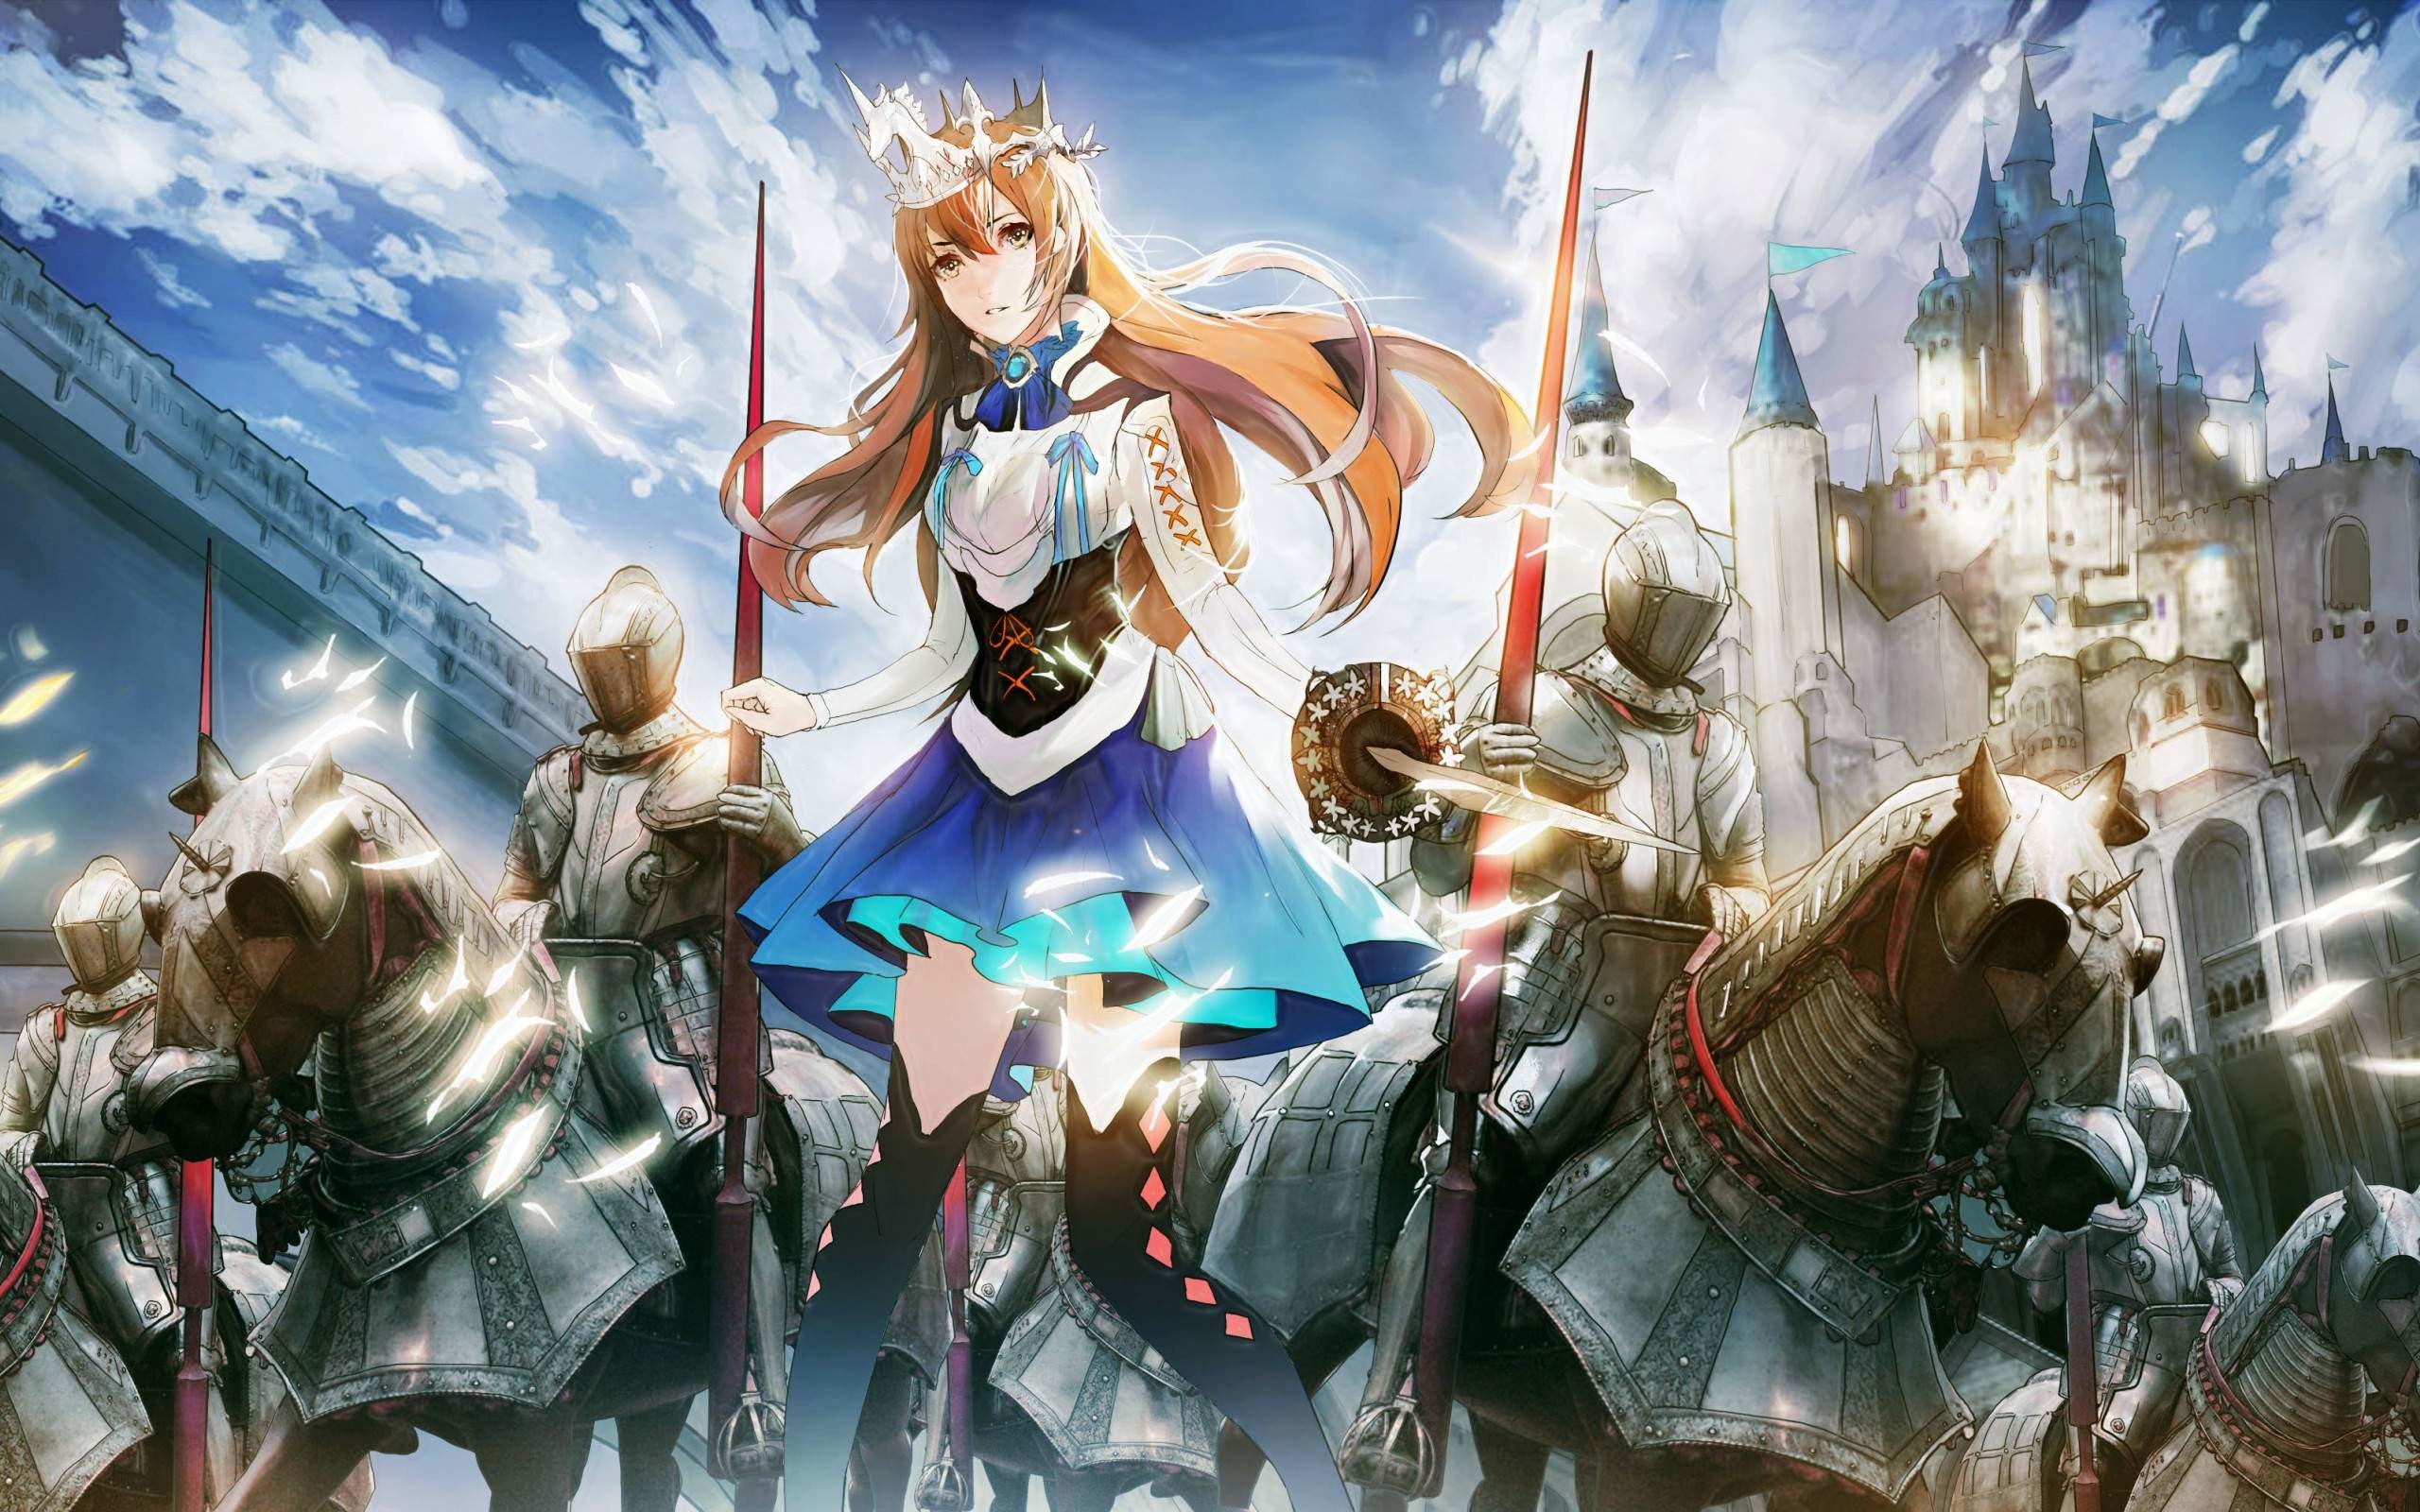 knight anime wallpapers wallpaper cave on knight anime wallpapers